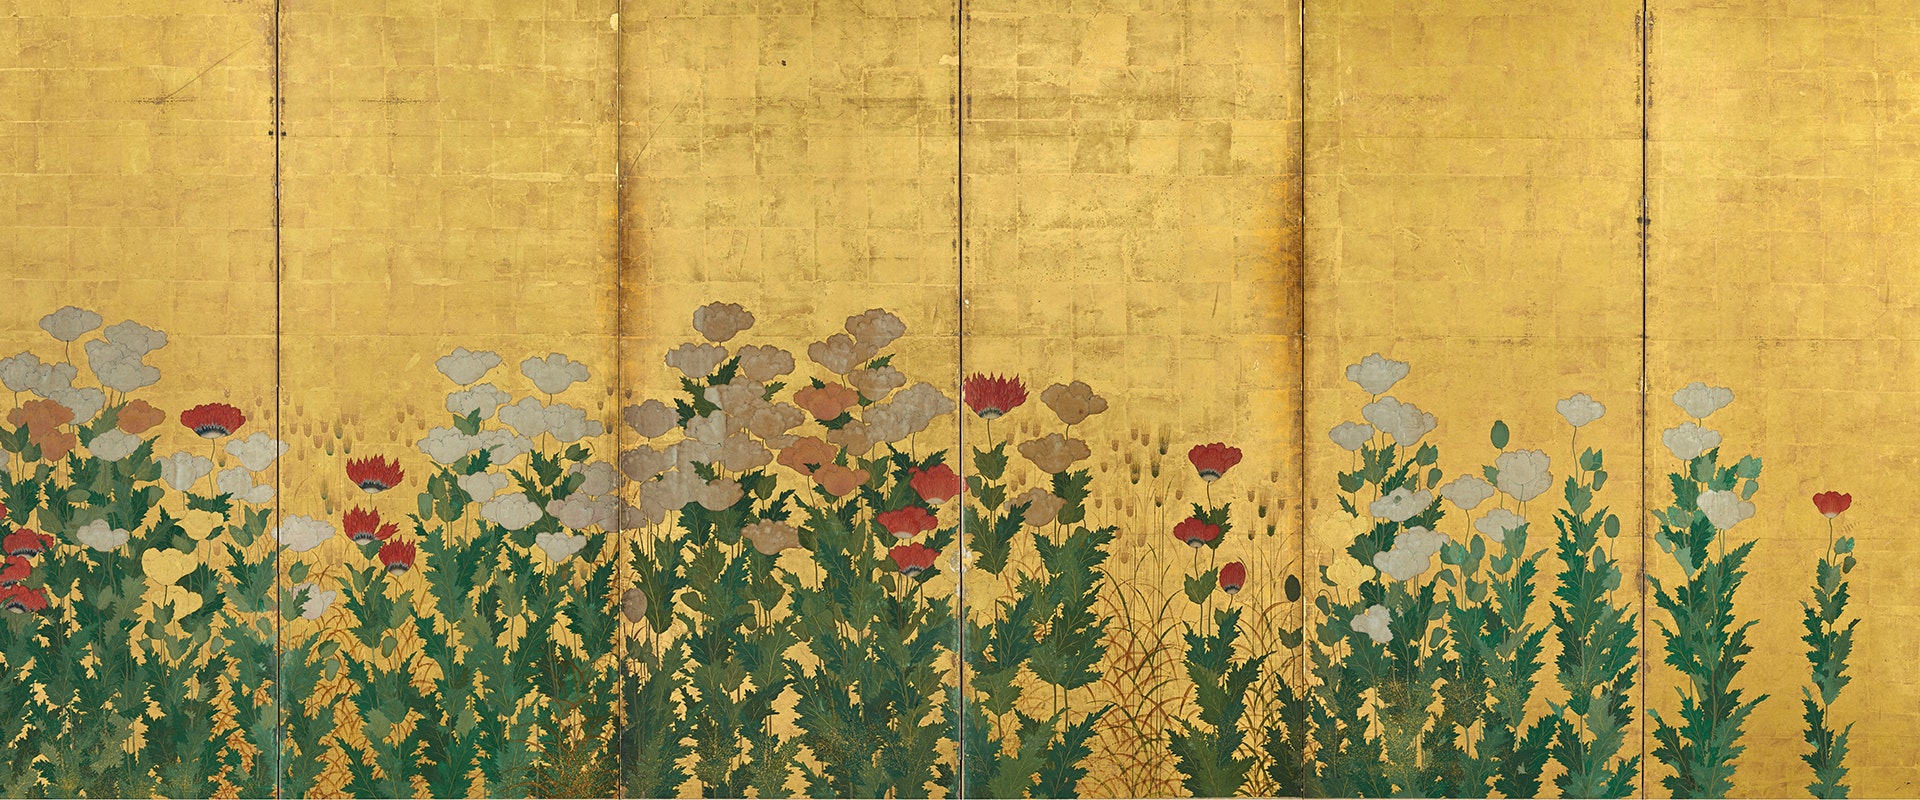 The Japanese Renaissance. Nature on painted screens from the 15th to the 17th centuries